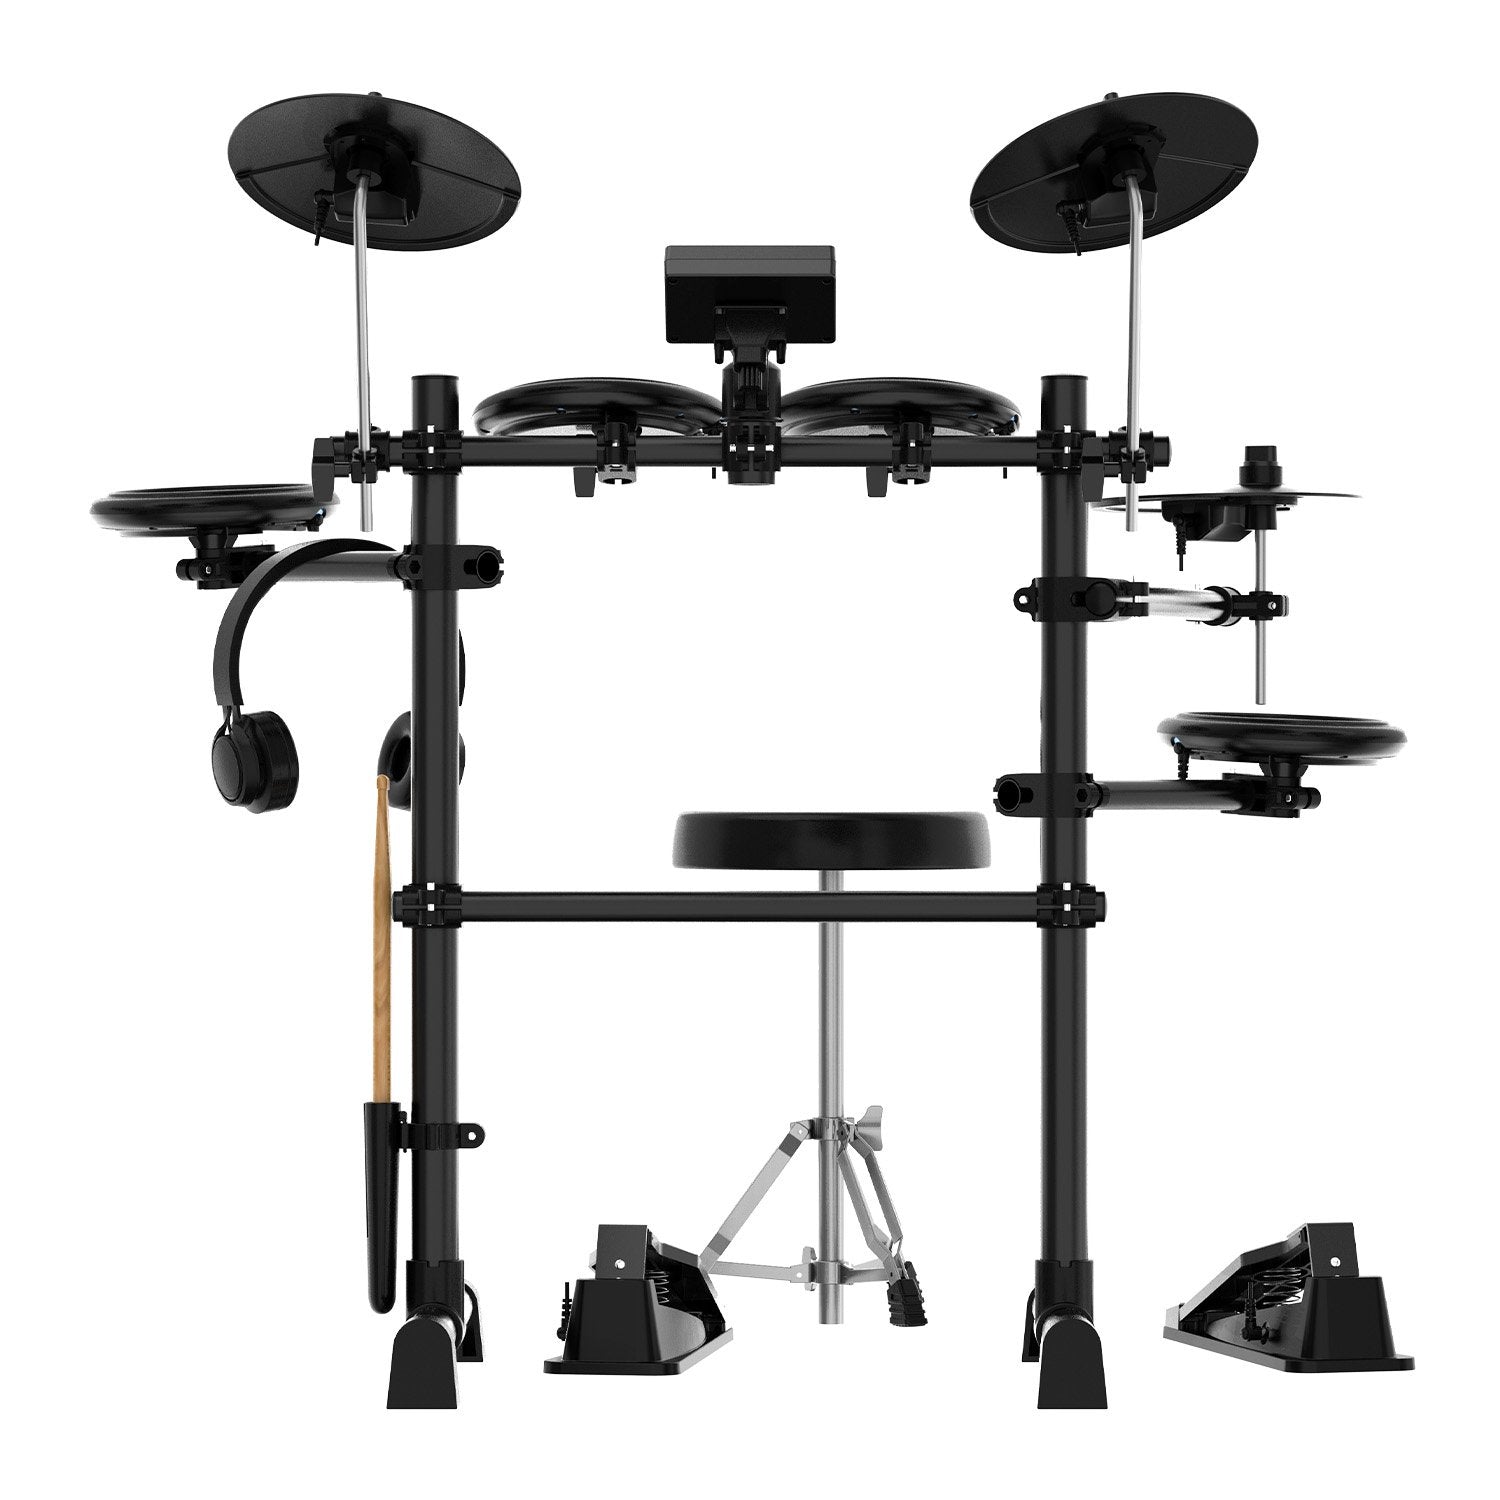 Karrera TDX-16 Electronic Drum Kit with Pedals - SILBERSHELL